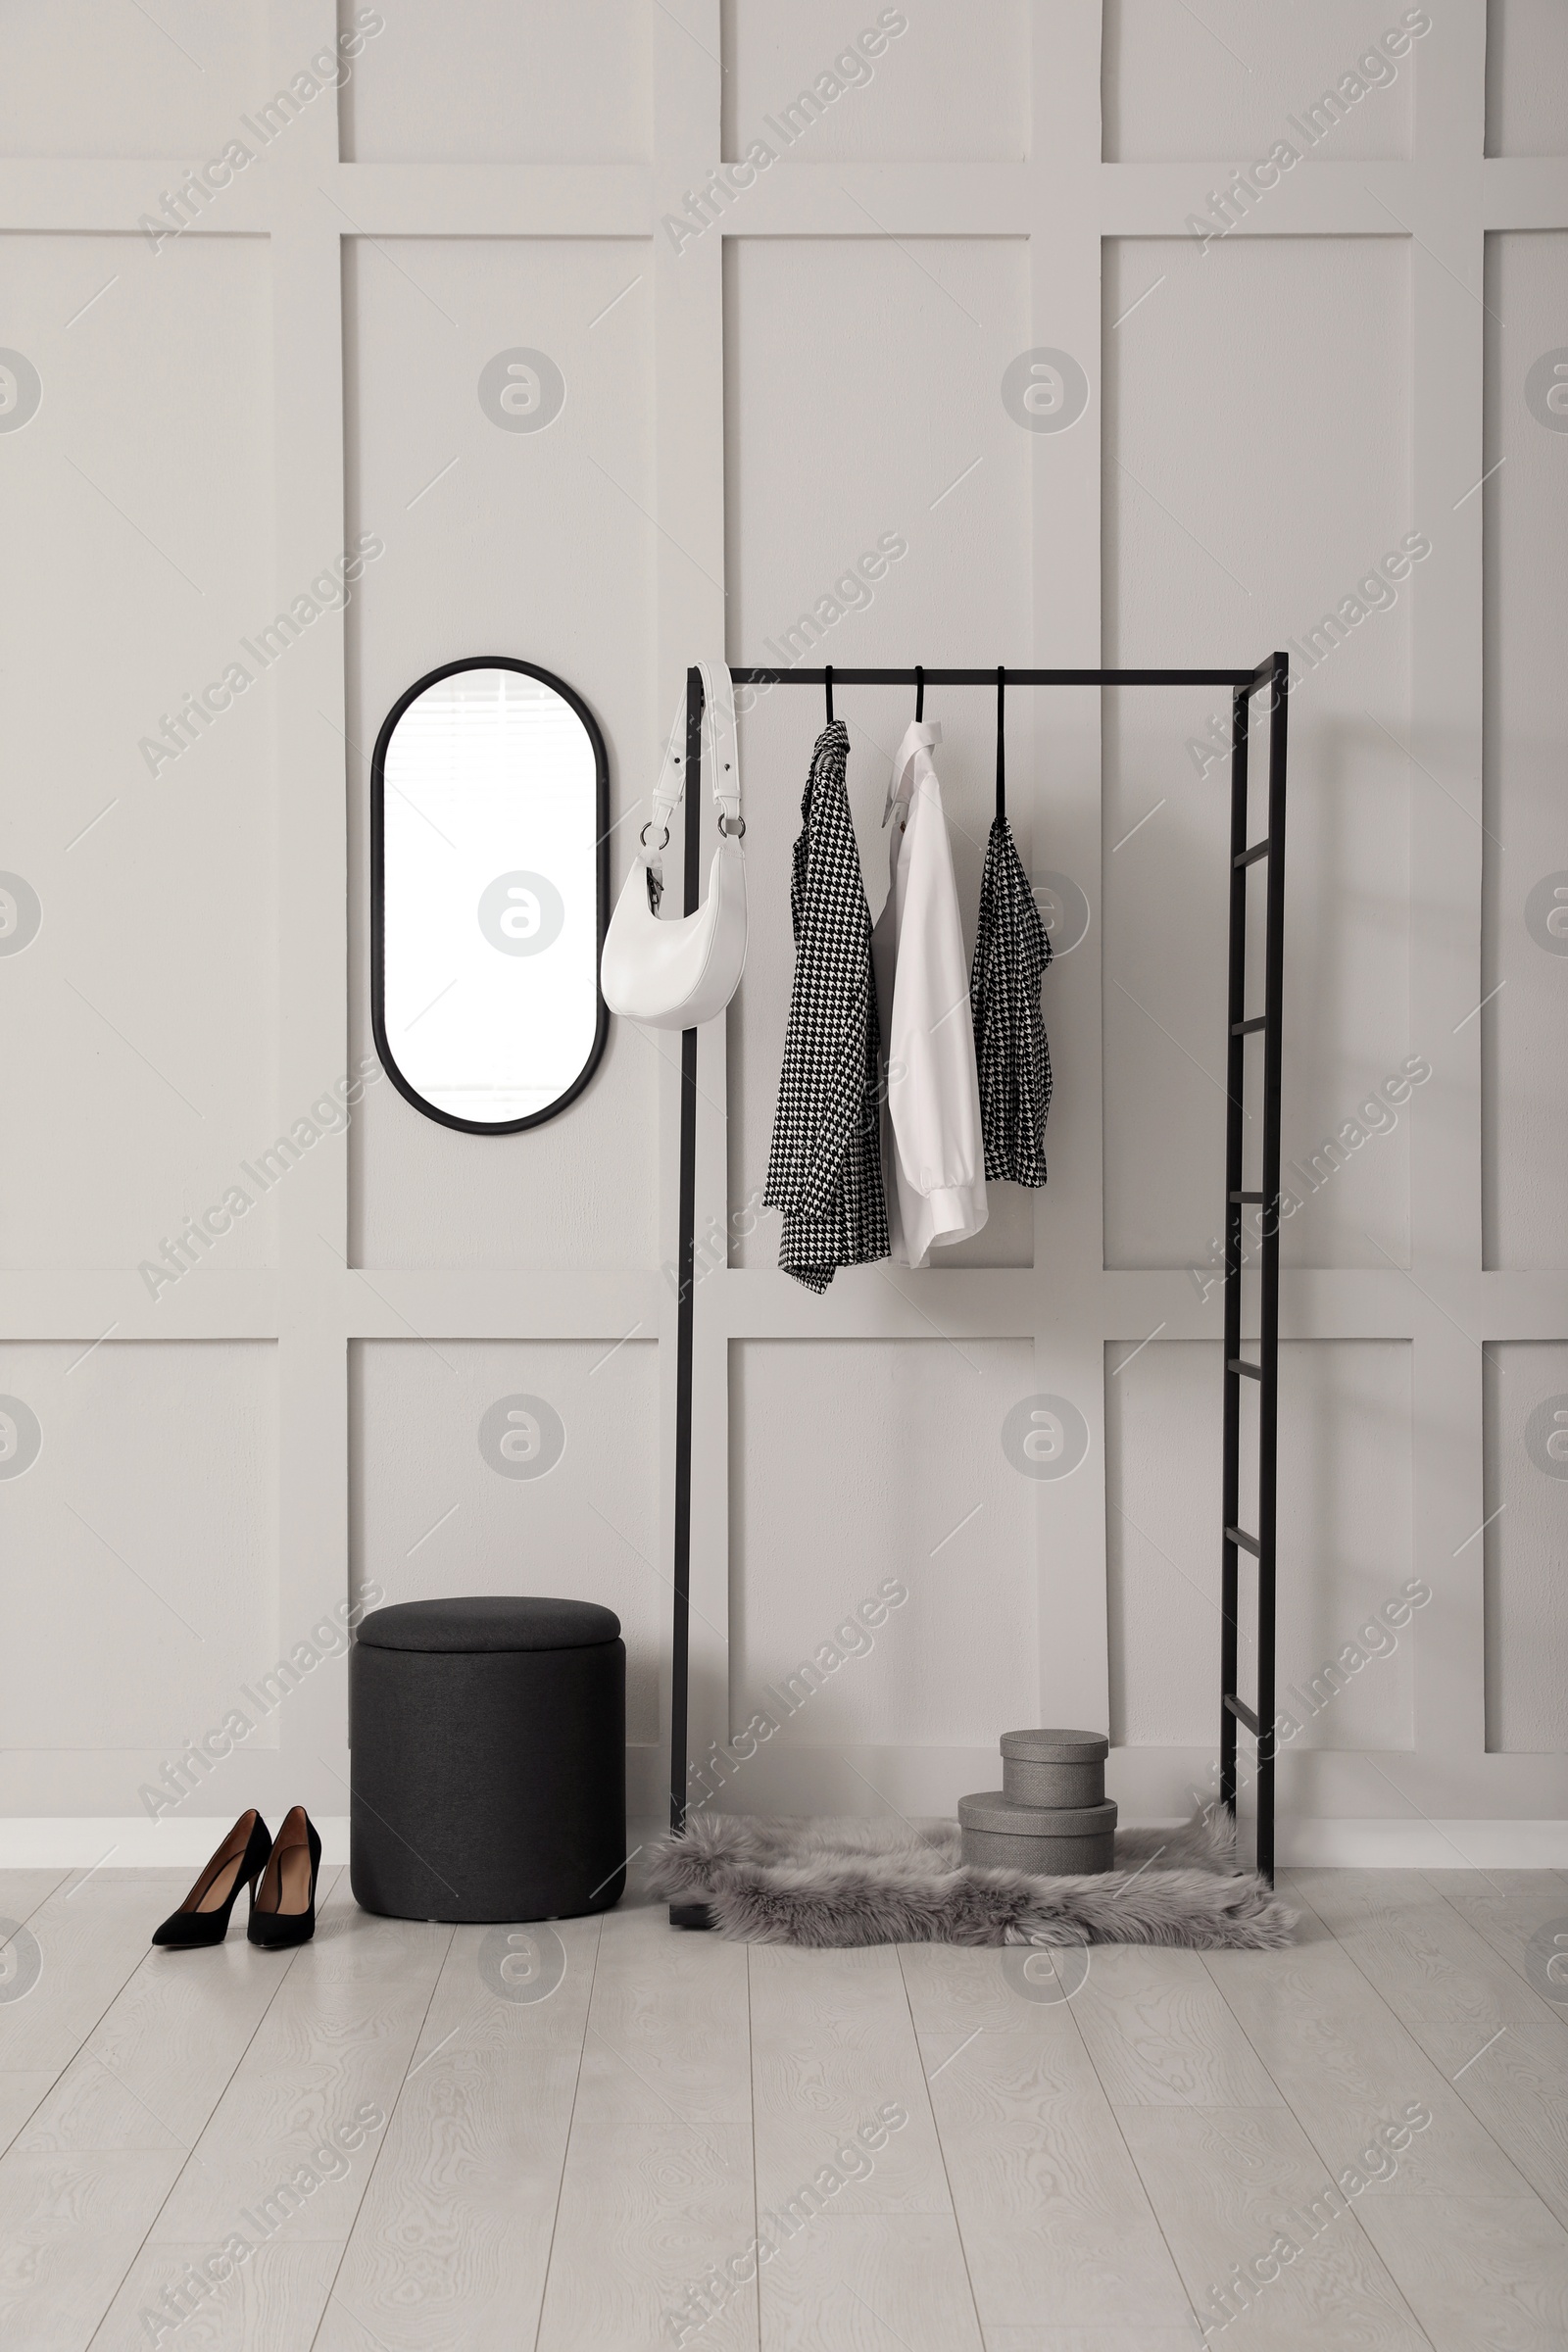 Photo of Simple hallway interior with clothing rack and mirror